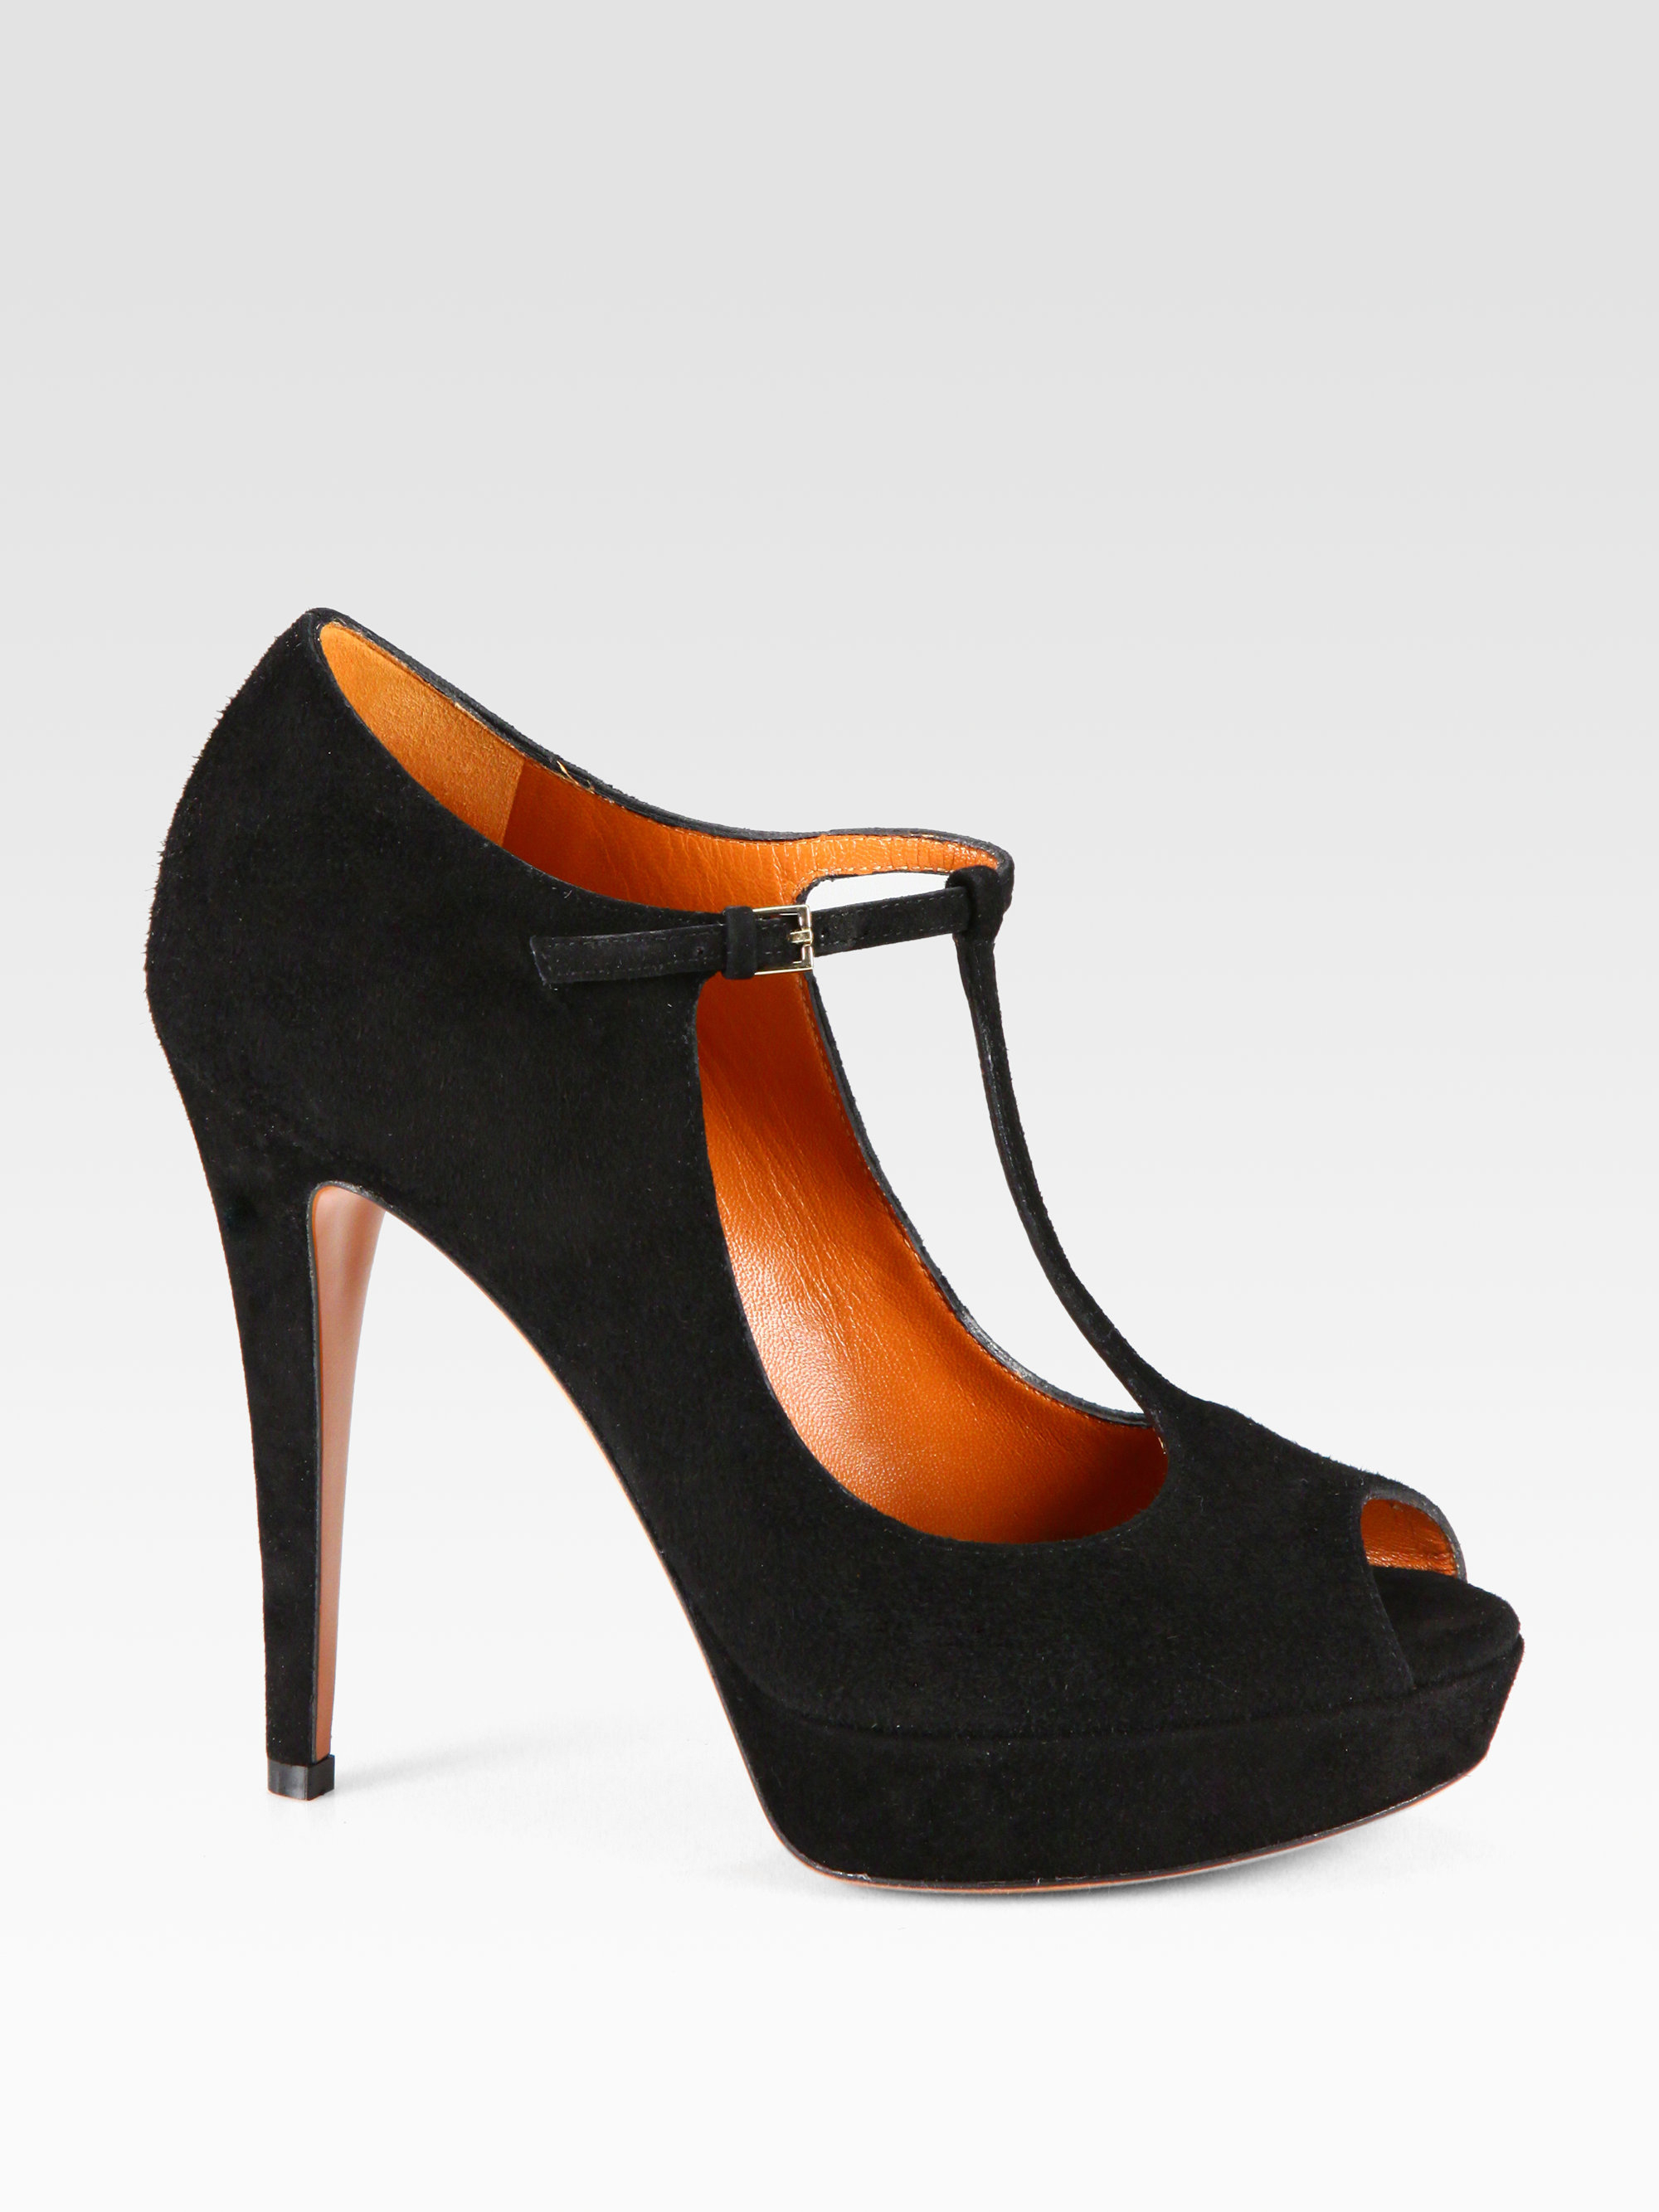 Lyst - Gucci Betty Suede Mary Jane Pumps in Black